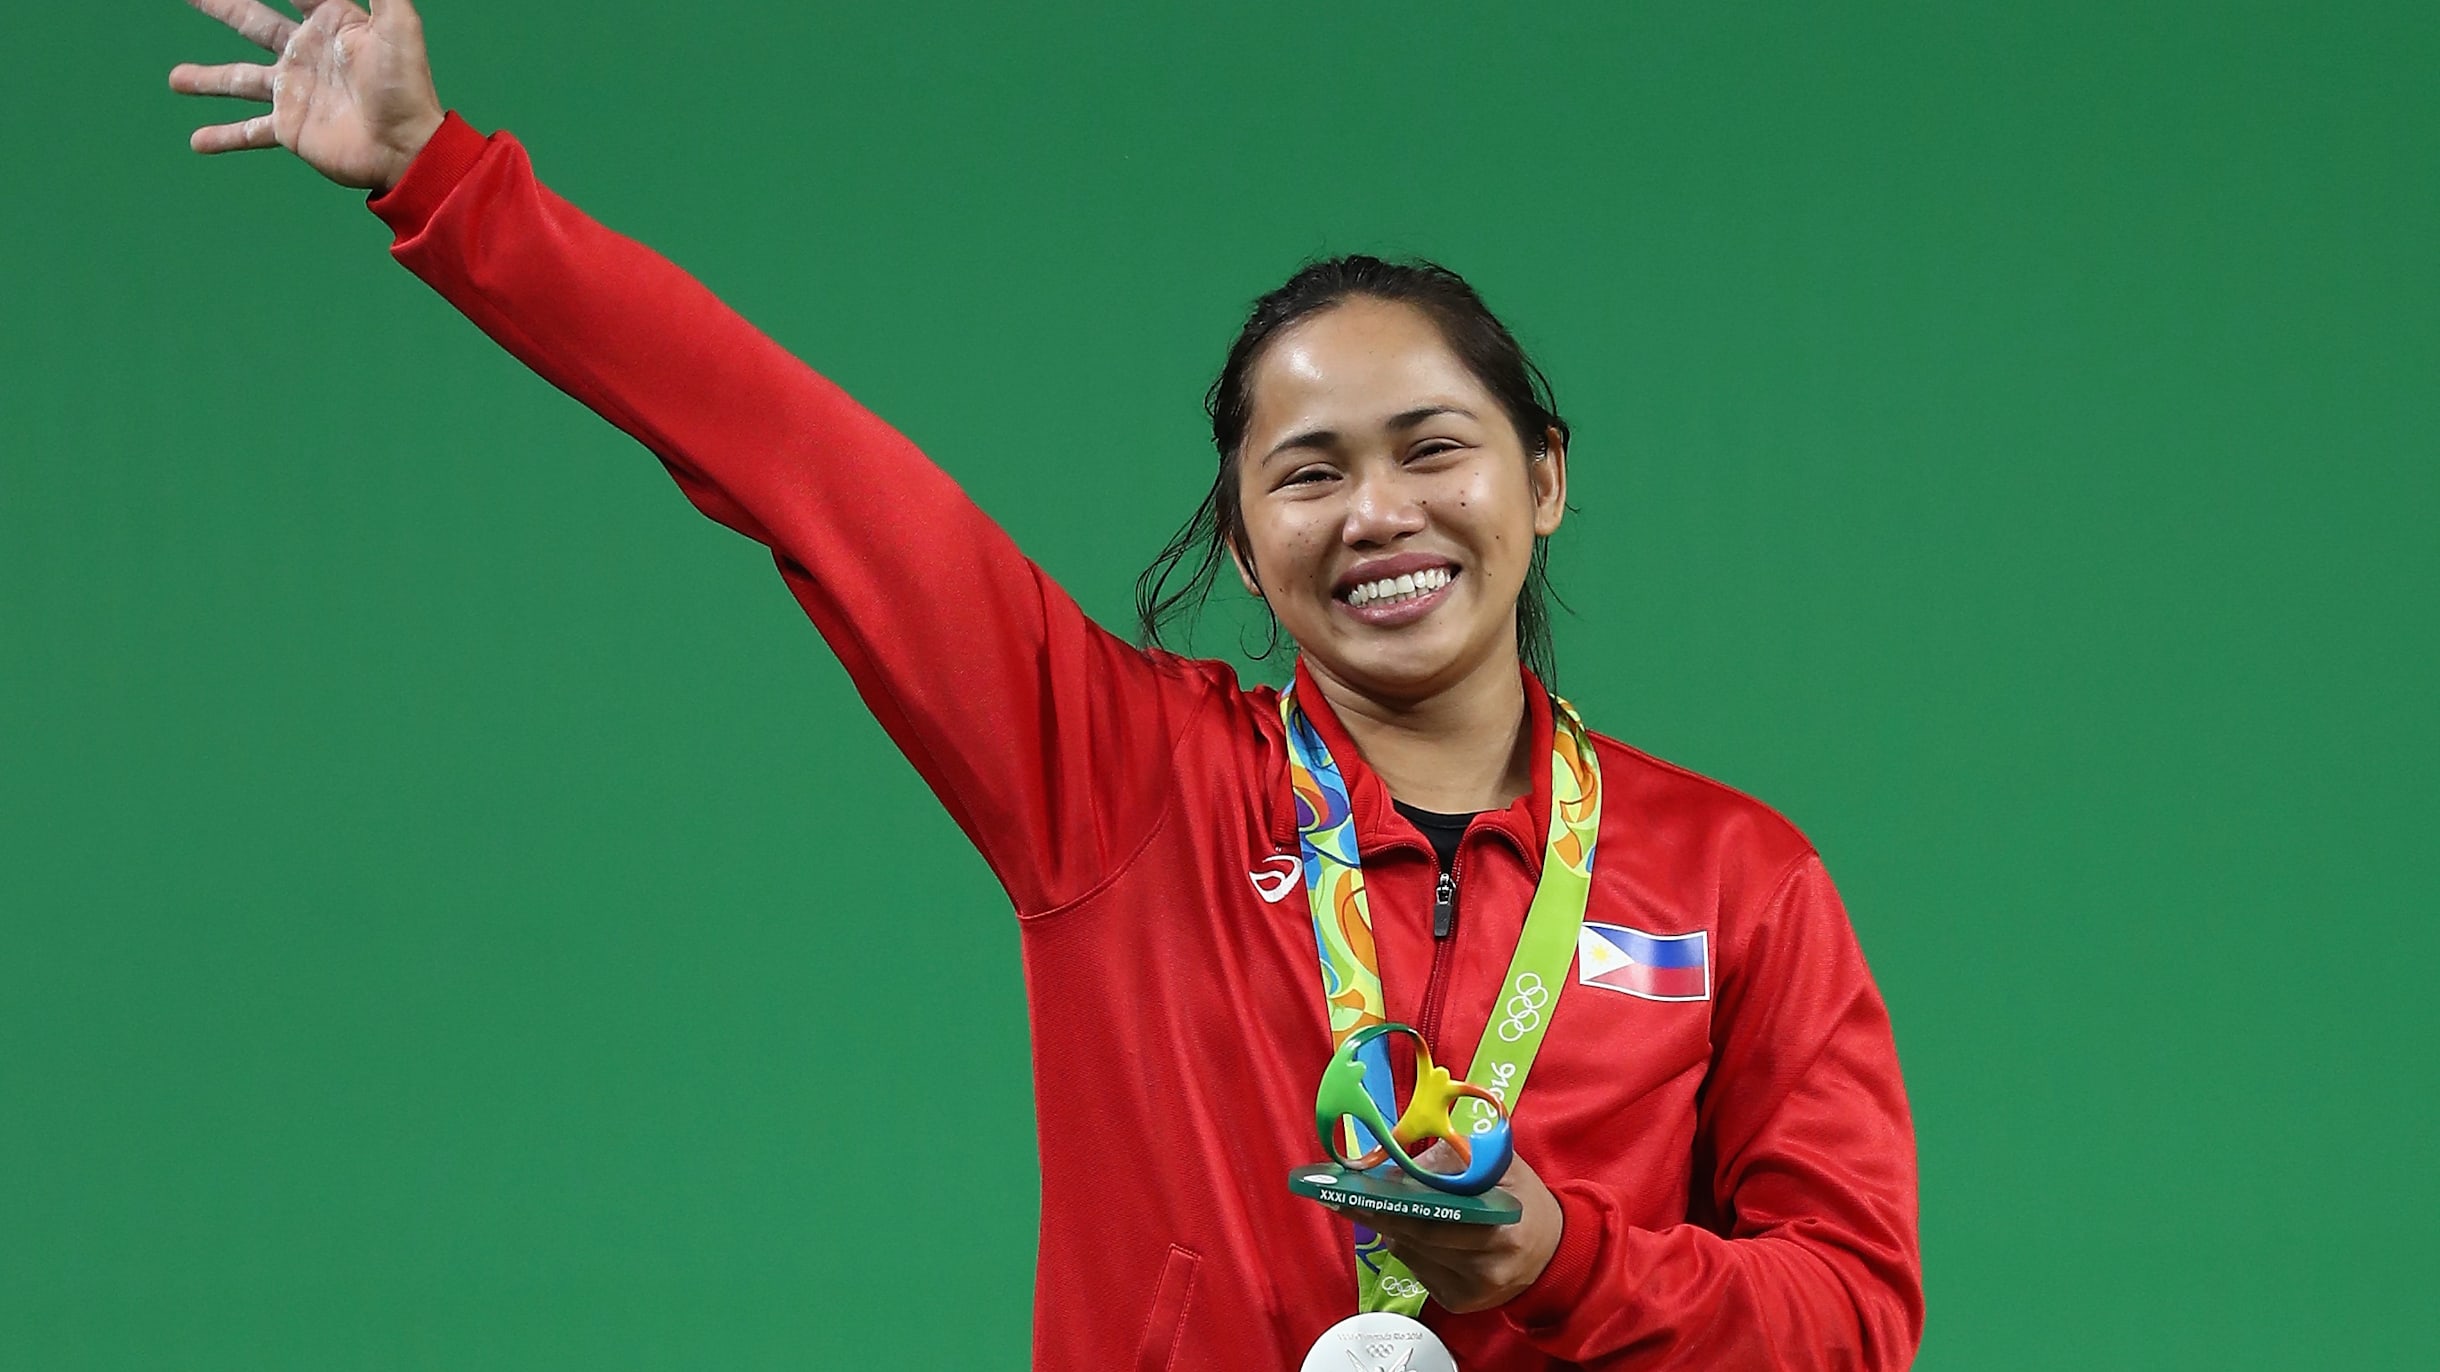 Hidilyn Diaz wins Philippines' first Olympic gold medal with